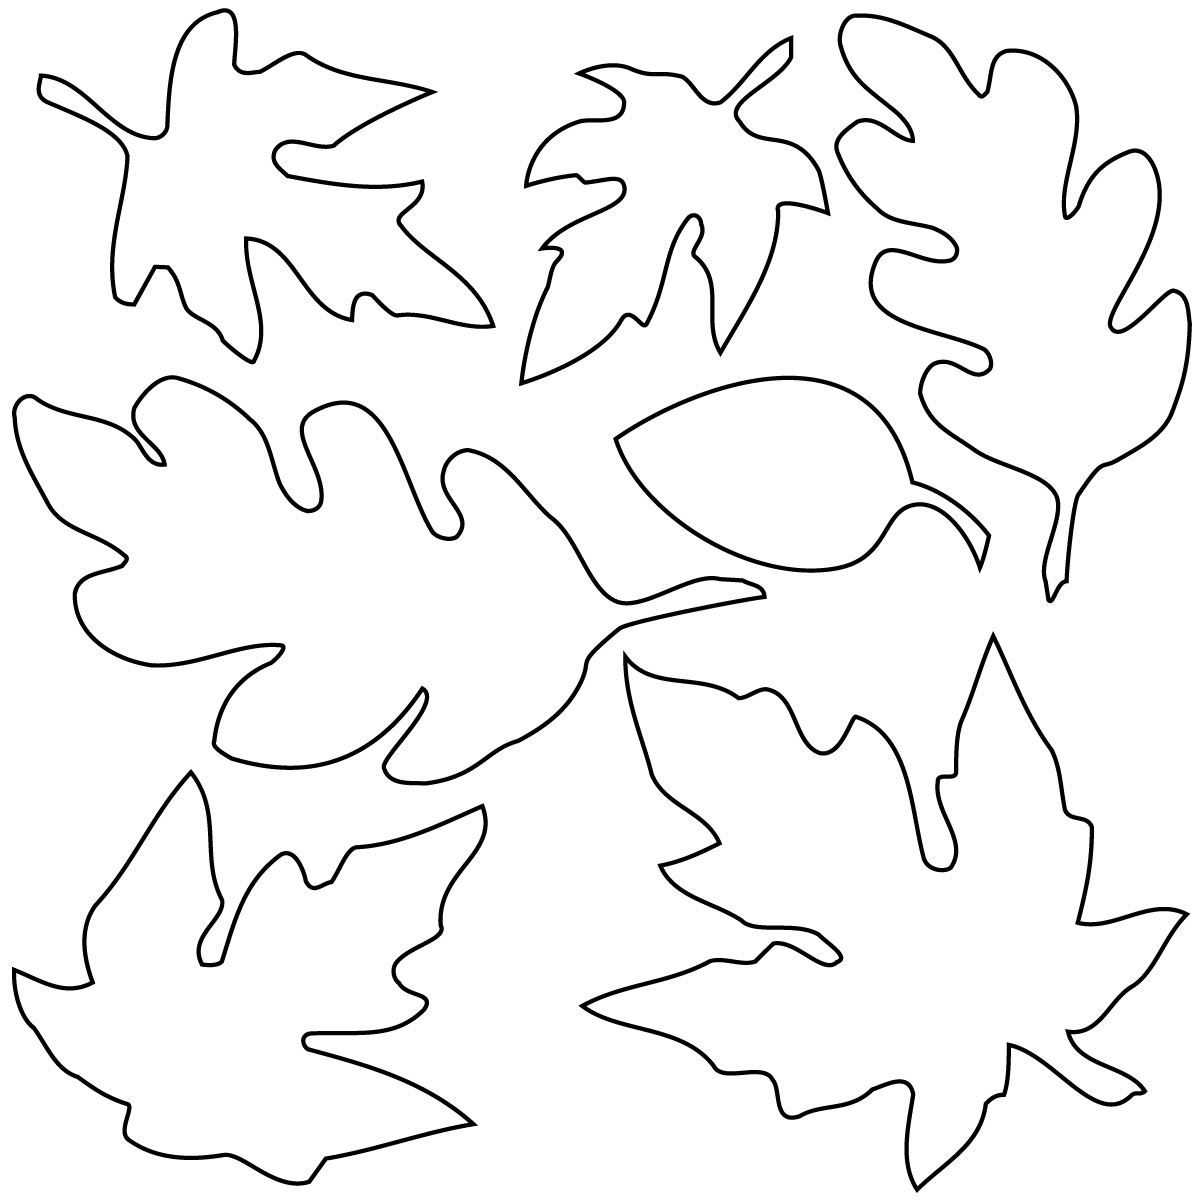 Leaves  black and white fall leaves clip art black and white